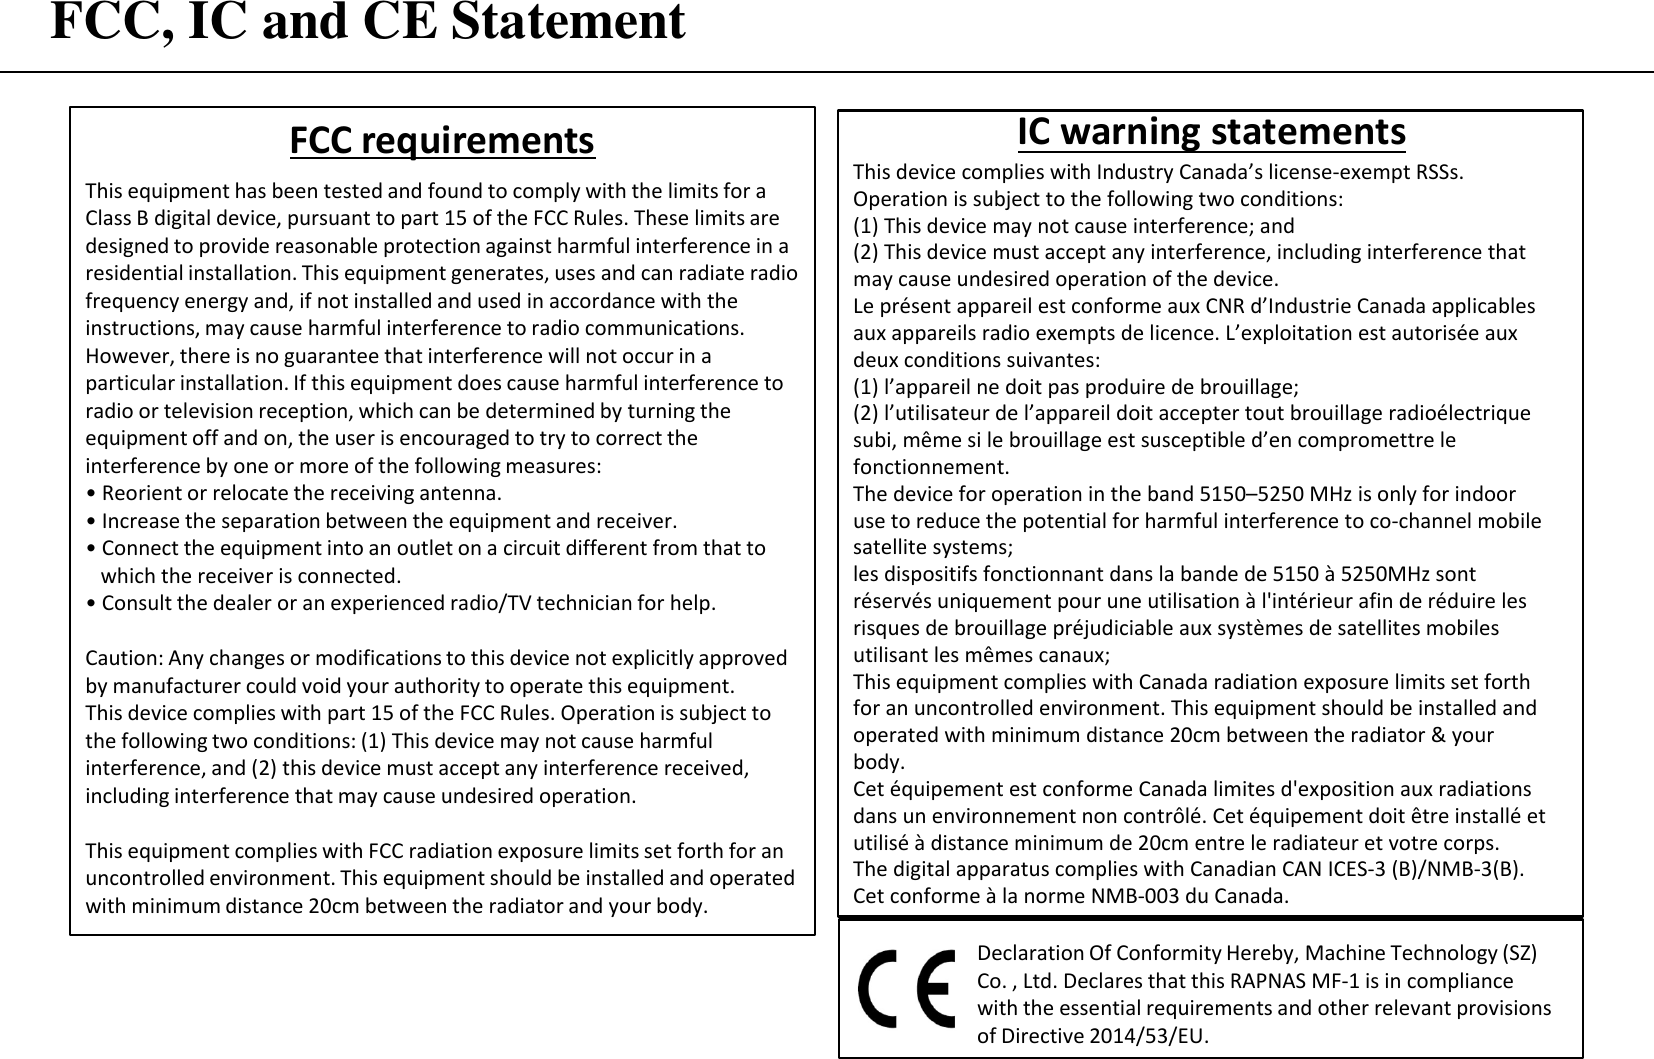 FCC, IC and CE Statement FCC requirements This equipment has been tested and found to comply with the limits for a Class B digital device, pursuant to part 15 of the FCC Rules. These limits are designed to provide reasonable protection against harmful interference in a residential installation. This equipment generates, uses and can radiate radio frequency energy and, if not installed and used in accordance with the instructions, may cause harmful interference to radio communications. However, there is no guarantee that interference will not occur in a particular installation. If this equipment does cause harmful interference to radio or television reception, which can be determined by turning the equipment off and on, the user is encouraged to try to correct the interference by one or more of the following measures: •Reorient or relocate the receiving antenna.• Increase the separation between the equipment and receiver.• Connect the equipment into an outlet on a circuit different from that towhich the receiver is connected.• Consult the dealer or an experienced radio/TV technician for help.Caution: Any changes or modifications to this device not explicitly approved by manufacturer could void your authority to operate this equipment. This device complies with part 15 of the FCC Rules. Operation is subject to the following two conditions: (1) This device may not cause harmful interference, and (2) this device must accept any interference received, including interference that may cause undesired operation. This equipment complies with FCC radiation exposure limits set forth for an uncontrolled environment. This equipment should be installed and operated with minimum distance 20cm between the radiator and your body. Declaration Of Conformity Hereby, Machine Technology (SZ) Co. , Ltd. Declares that this RAPNAS MF-1 is in compliance with the essential requirements and other relevant provisions of Directive 2014/53/EU. IC warning statements This device complies with Industry Canada’s license-exempt RSSs. Operation is subject to the following two conditions: (1) This device may not cause interference; and(2) This device must accept any interference, including interference that may cause undesired operation of the device.Le présent appareil est conforme aux CNR d’Industrie Canada applicables aux appareils radio exempts de licence. L’exploitation est autorisée aux deux conditions suivantes: (1) l’appareil ne doit pas produire de brouillage;(2) l’utilisateur de l’appareil doit accepter tout brouillage radioélectrique subi, même si le brouillage est susceptible d’en compromettre le fonctionnement.The device for operation in the band 5150–5250 MHz is only for indoor use to reduce the potential for harmful interference to co-channel mobile satellite systems;  les dispositifs fonctionnant dans la bande de 5150 à 5250MHz sont réservés uniquement pour une utilisation à l&apos;intérieur afin de réduire les risques de brouillage préjudiciable aux systèmes de satellites mobiles utilisant les mêmes canaux; This equipment complies with Canada radiation exposure limits set forth for an uncontrolled environment. This equipment should be installed and operated with minimum distance 20cm between the radiator &amp; your body.Cet équipement est conforme Canada limites d&apos;exposition aux radiations dans un environnement non contrôlé. Cet équipement doit être installé et utilisé à distance minimum de 20cm entre le radiateur et votre corps. The digital apparatus complies with Canadian CAN ICES-3 (B)/NMB-3(B).Cet conforme à la norme NMB-003 du Canada.